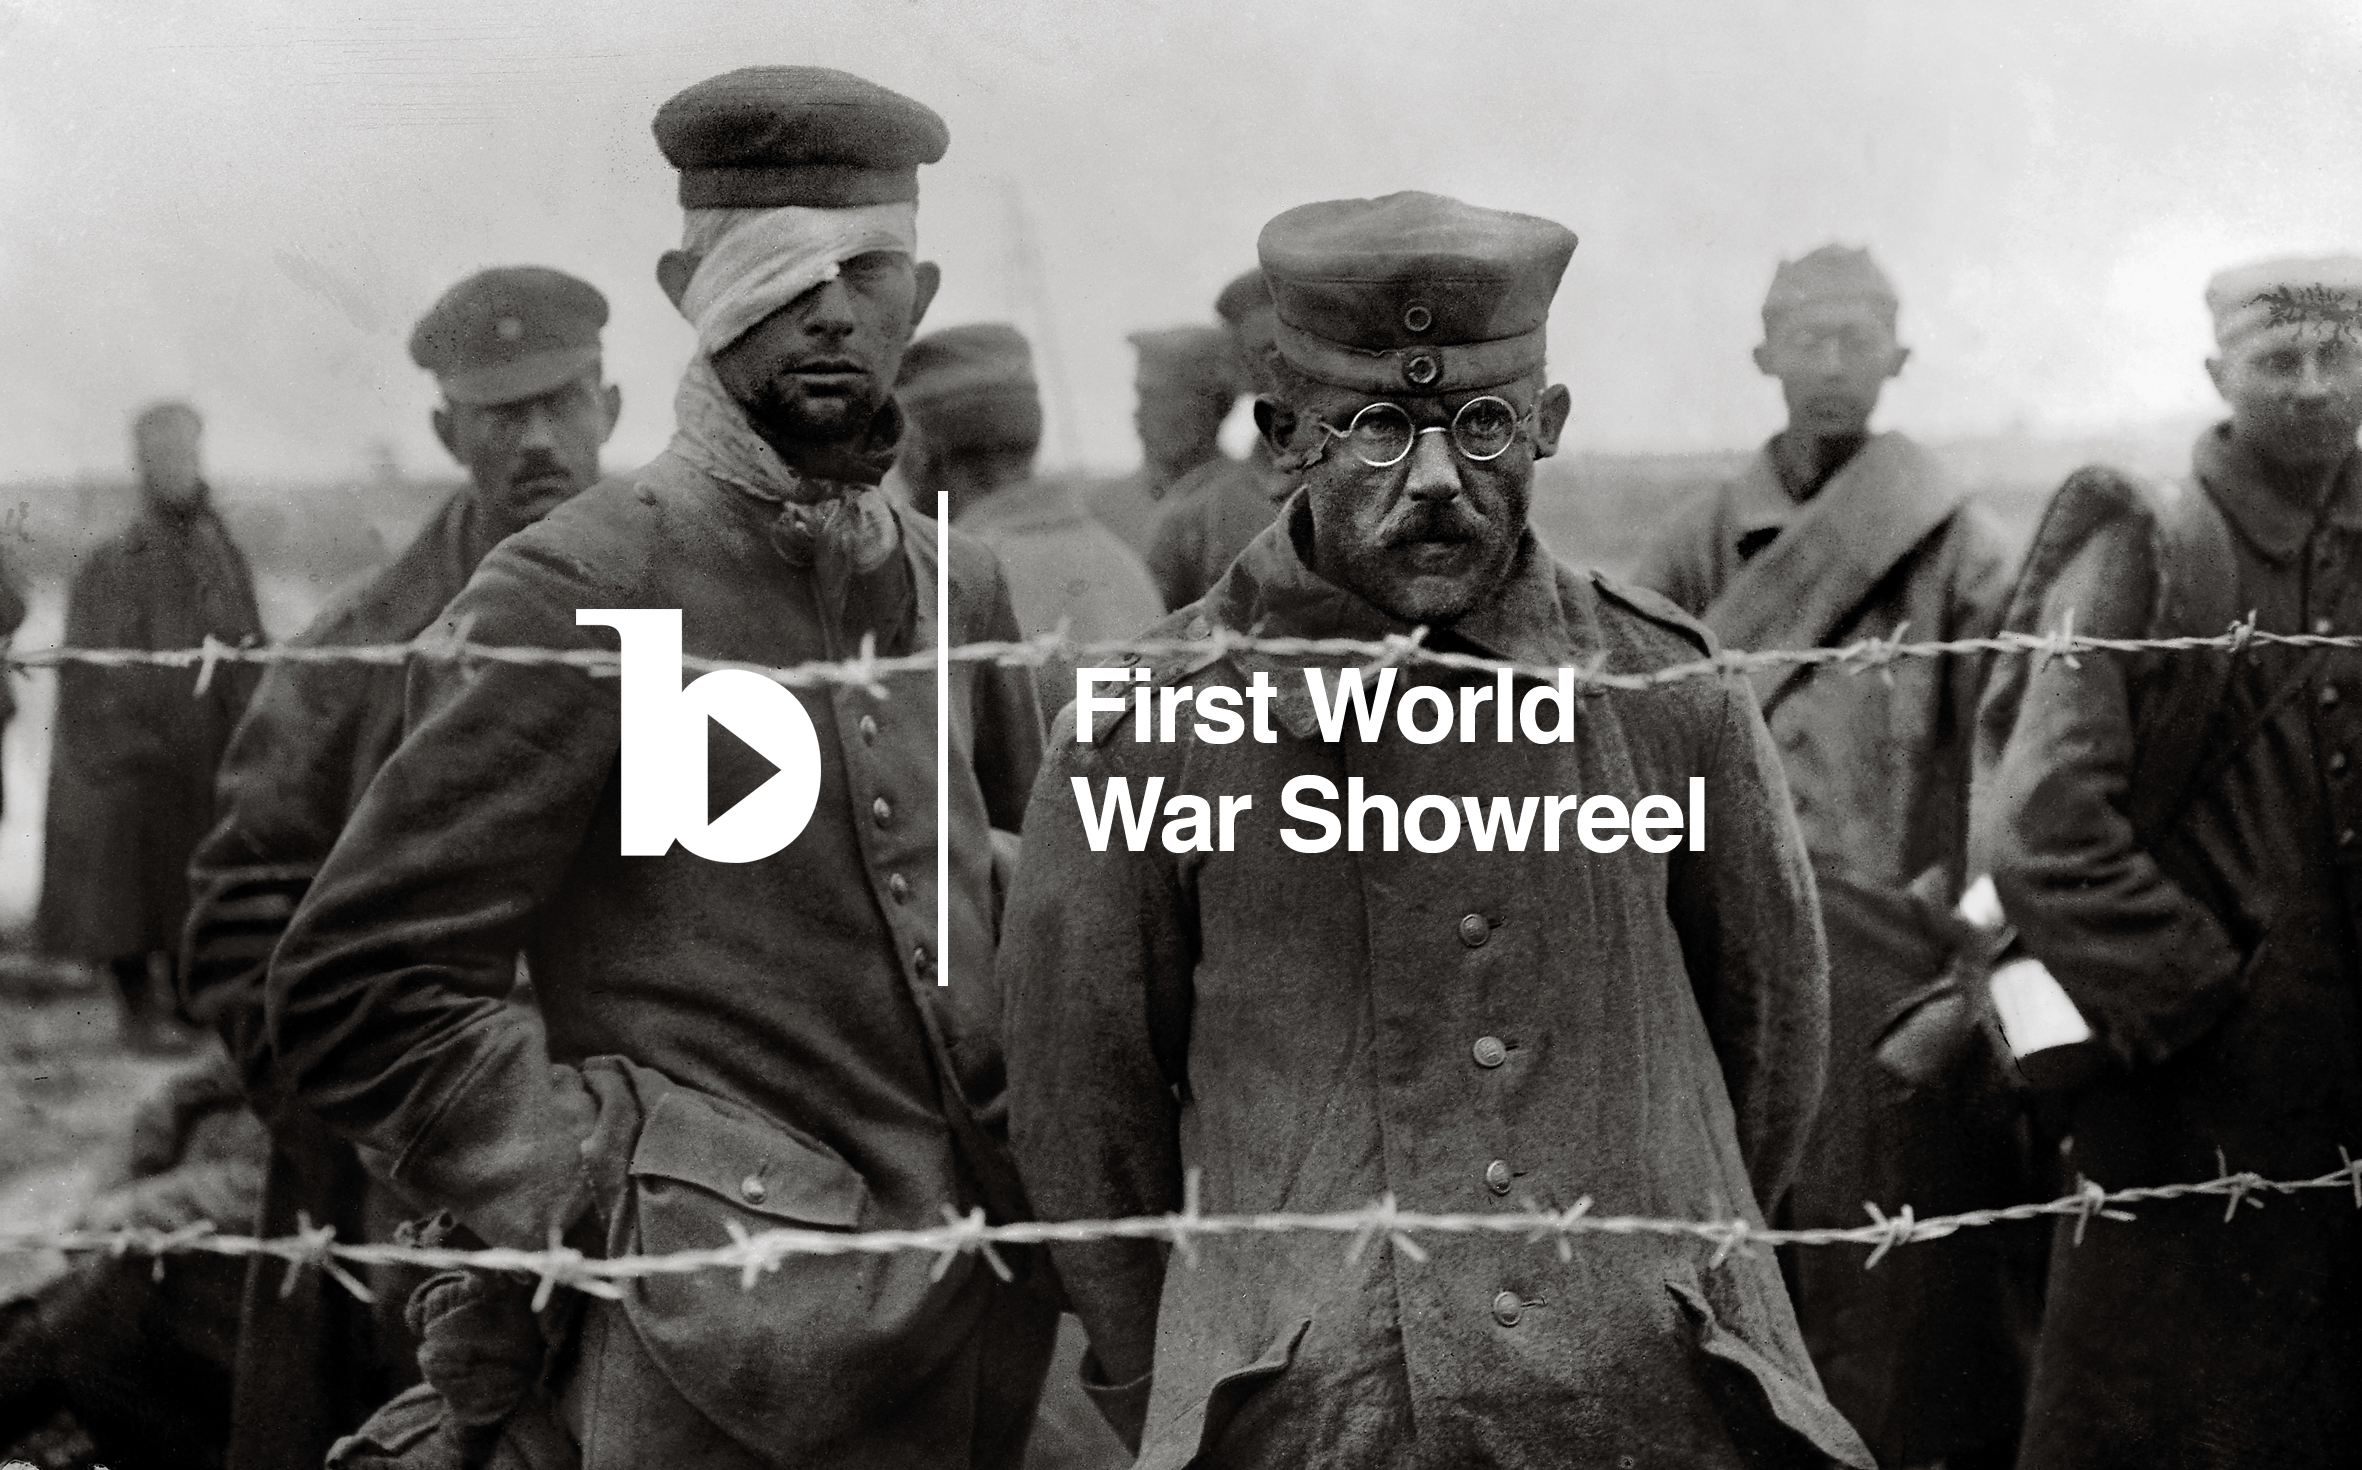 click on image to play our First World War showreel